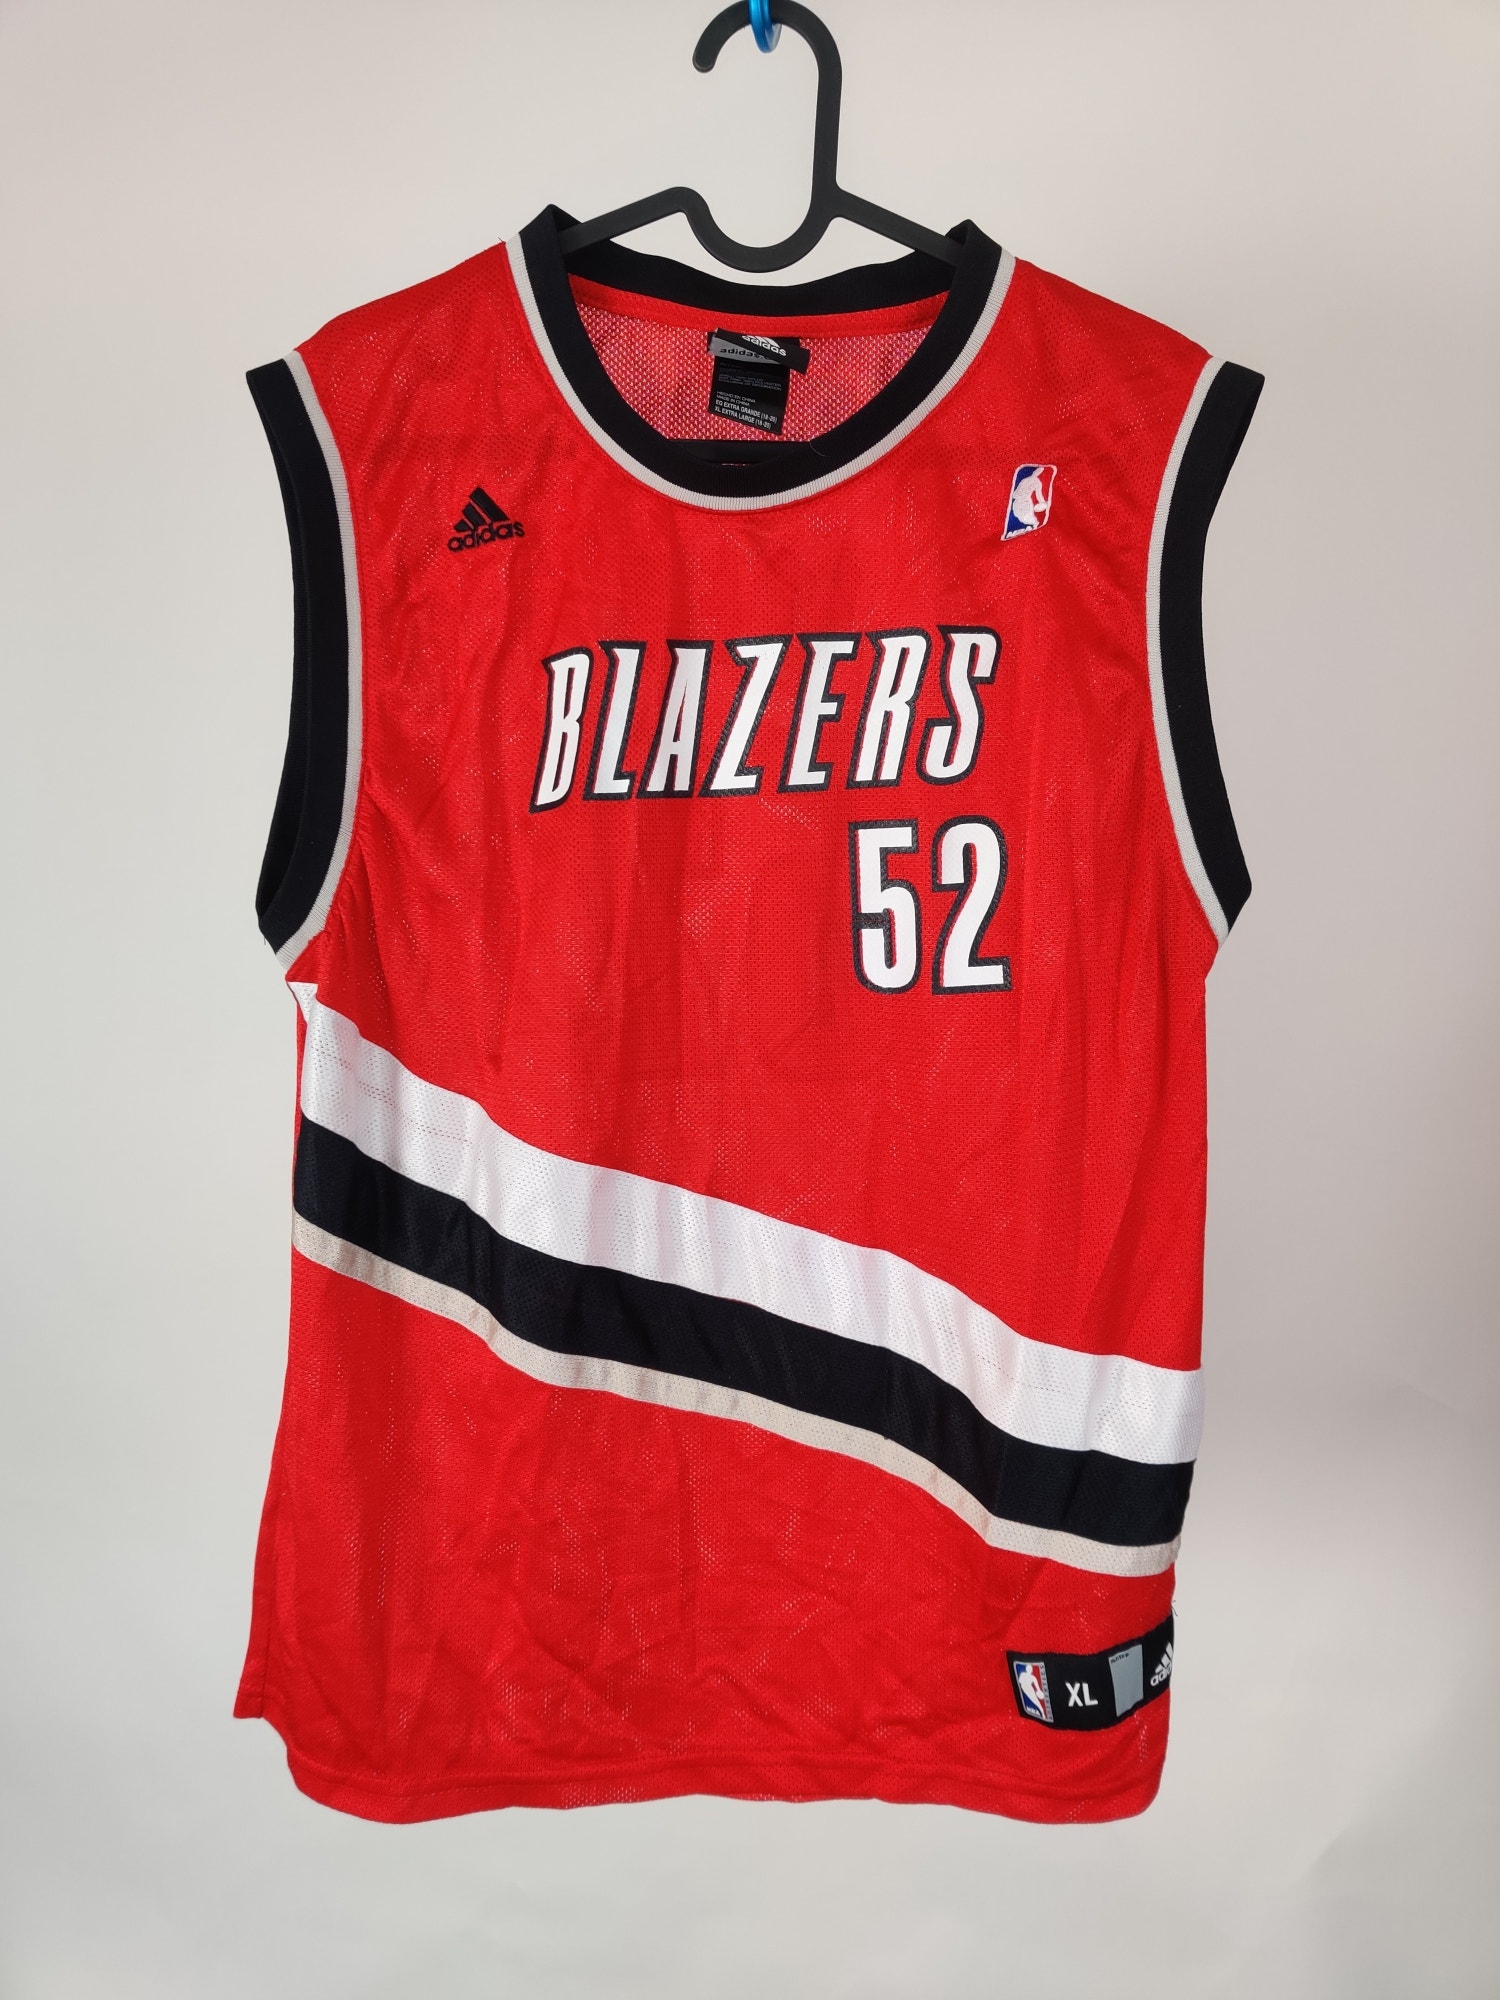 (V) Adidas NBA Portland Trail Blazers Youth jersey players Oden #52 sz XL  - Picture 4 of 11